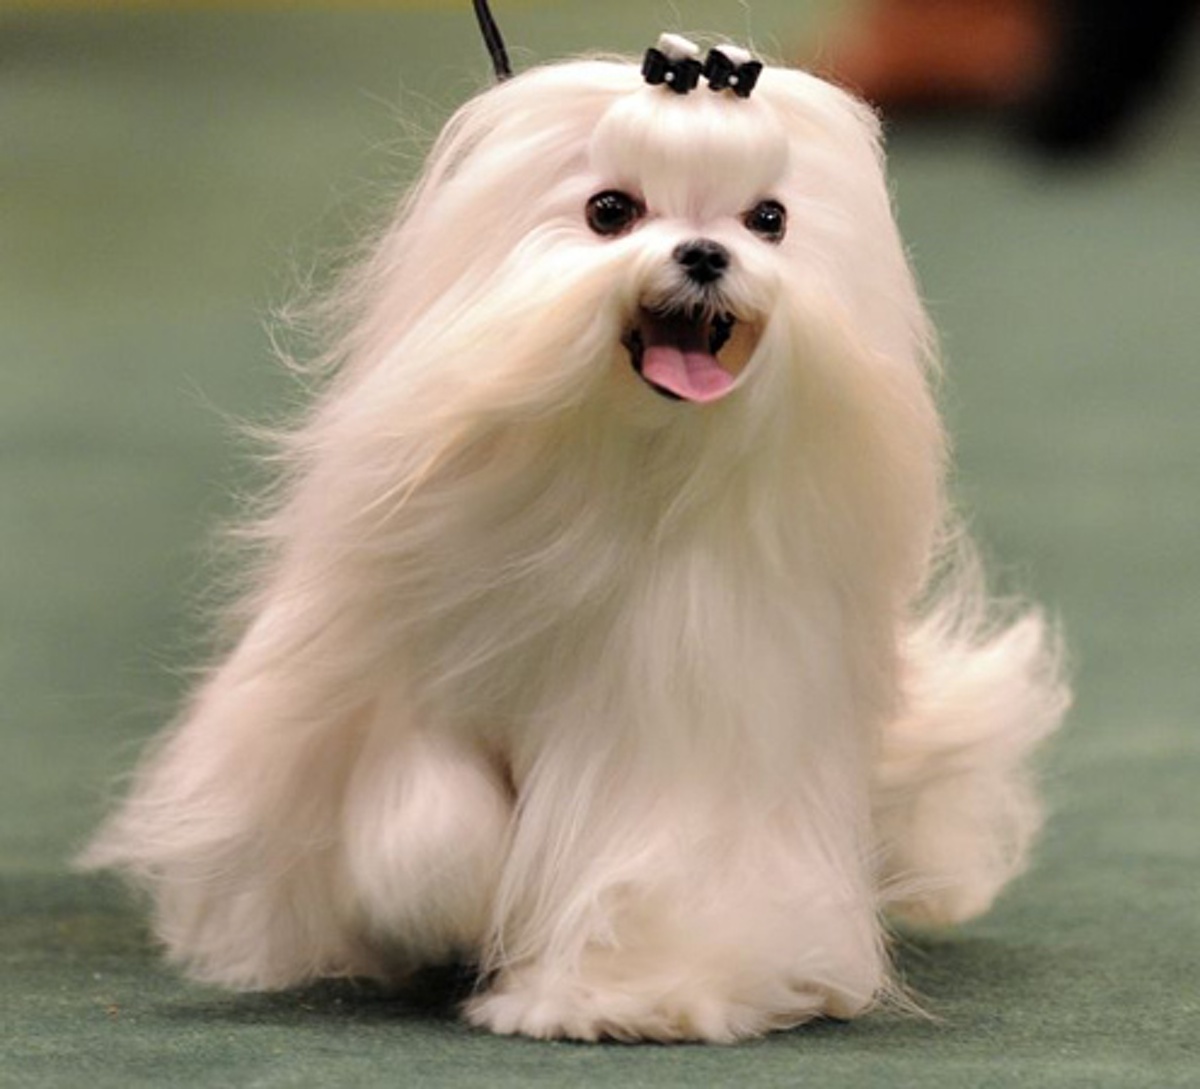 21 Cute Pet Dogs With Trendy Hairstyles Dog Fashion